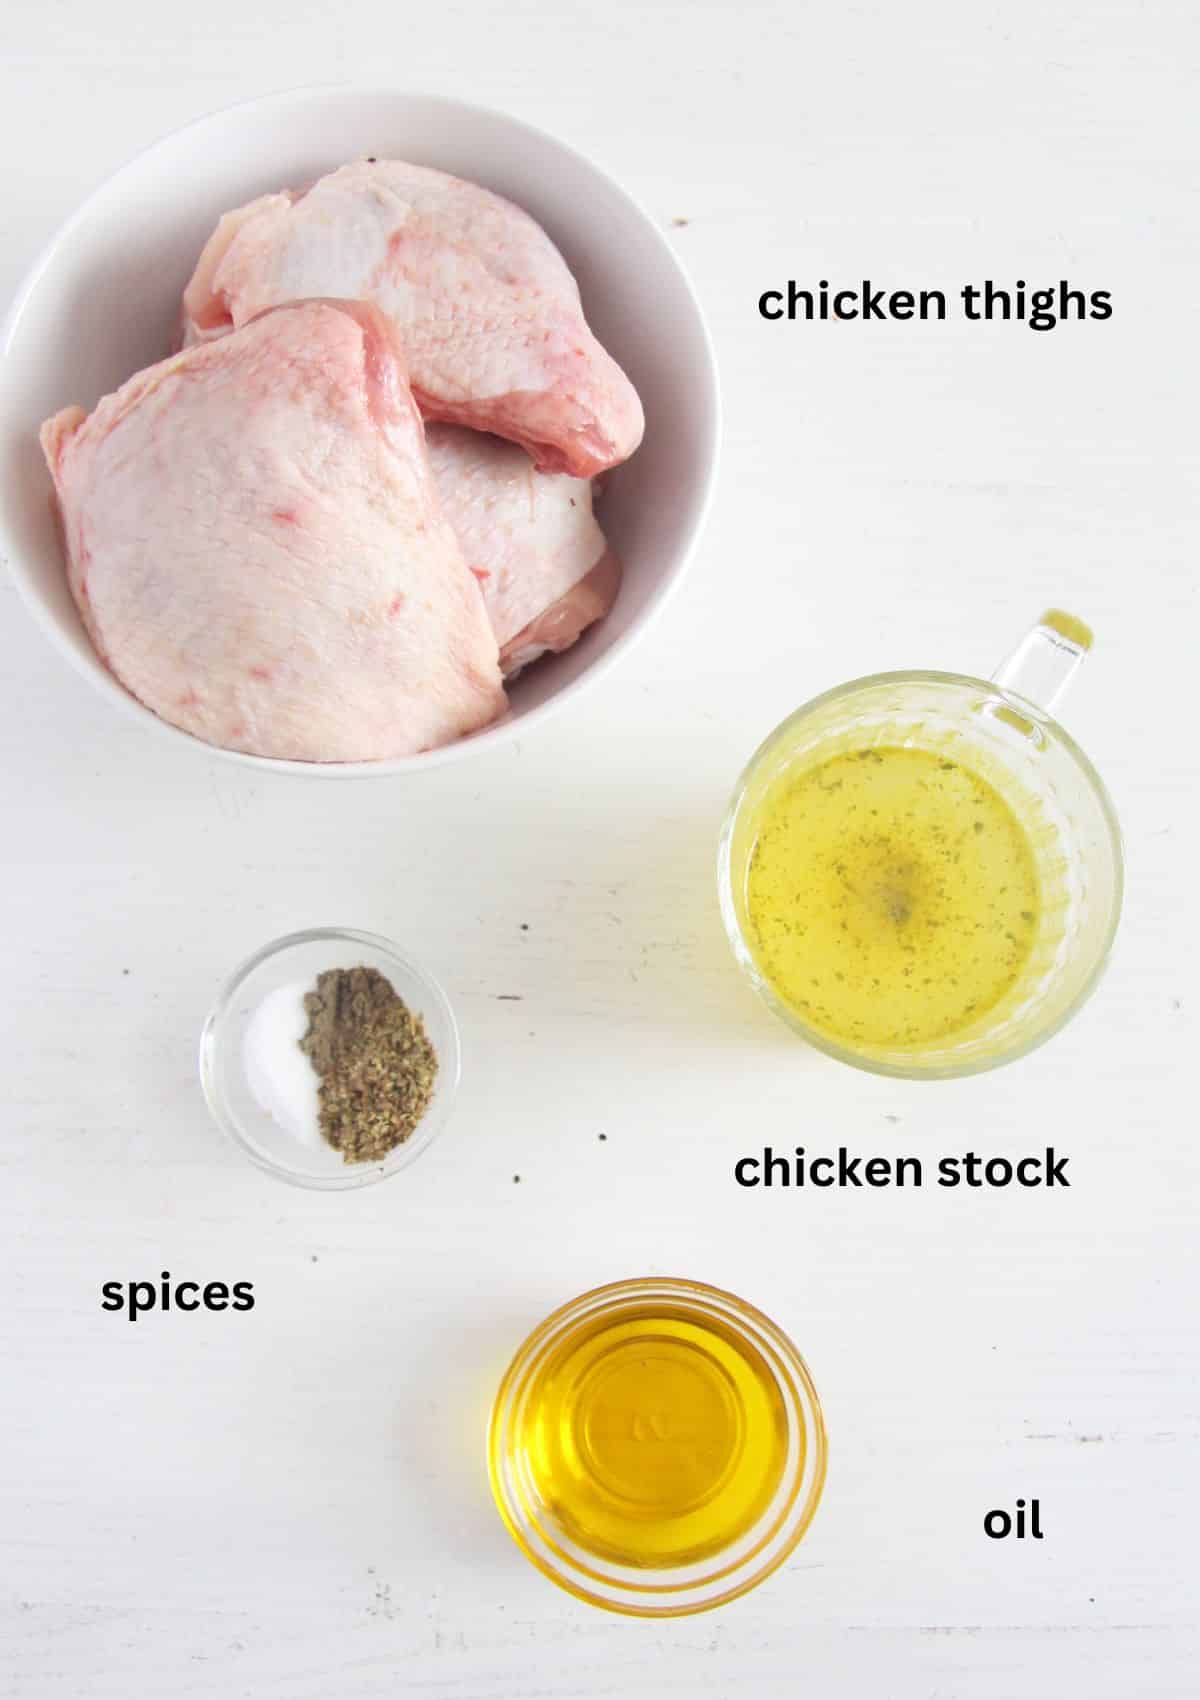 raw chicken pieces, oil, spices and stock in bowls.